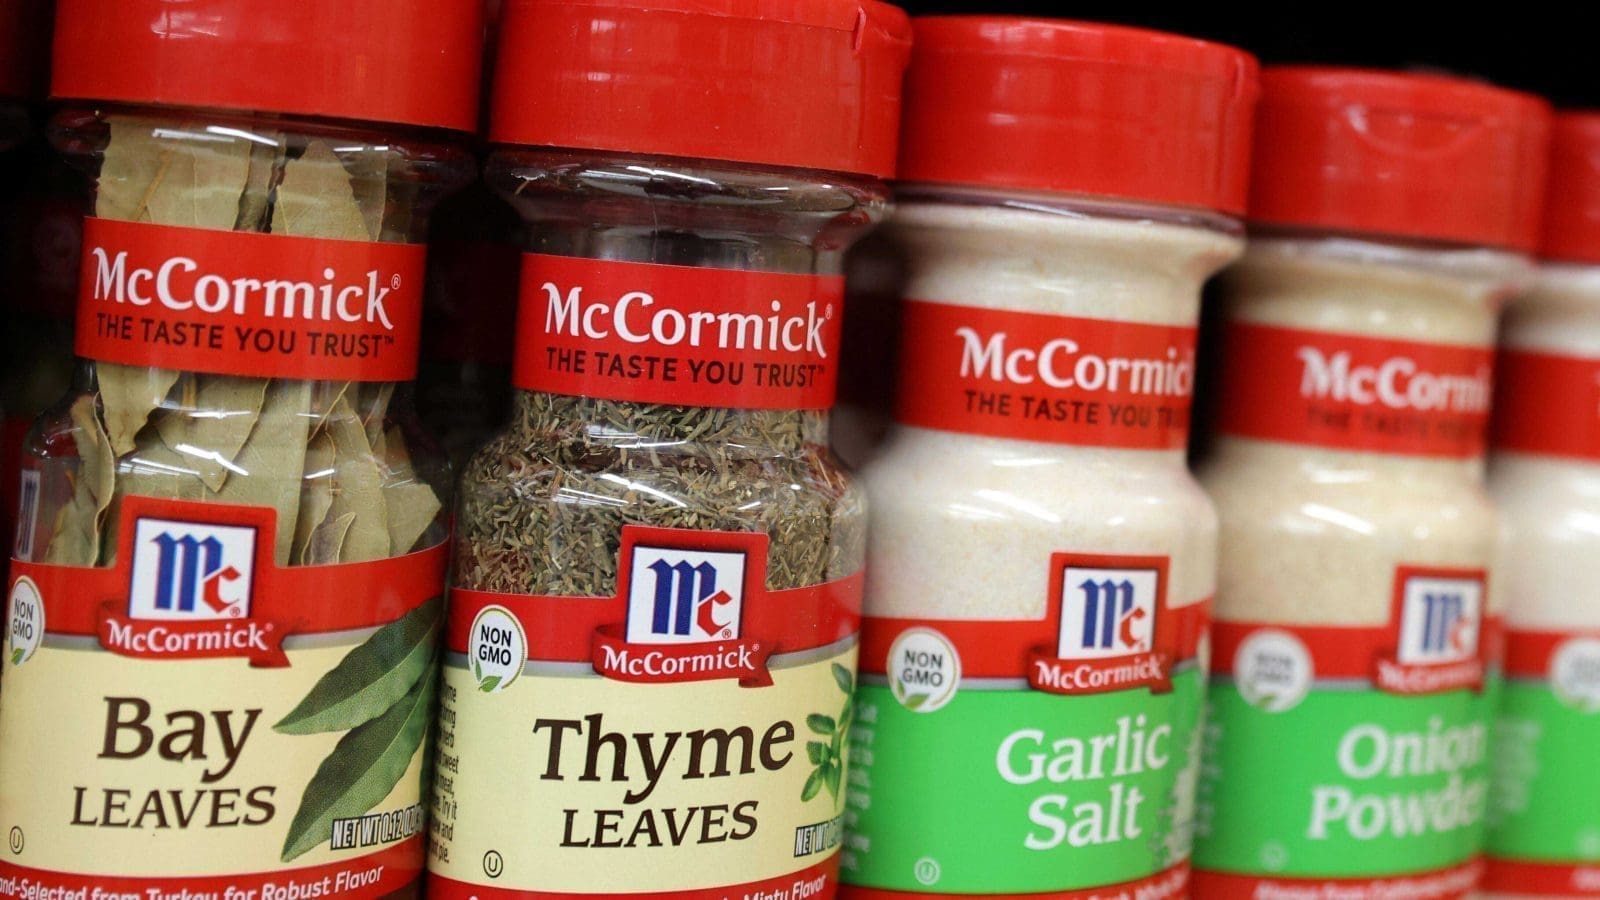 Flavor and Spices producer McCormick appoints former COO Brendan Foley as new CEO